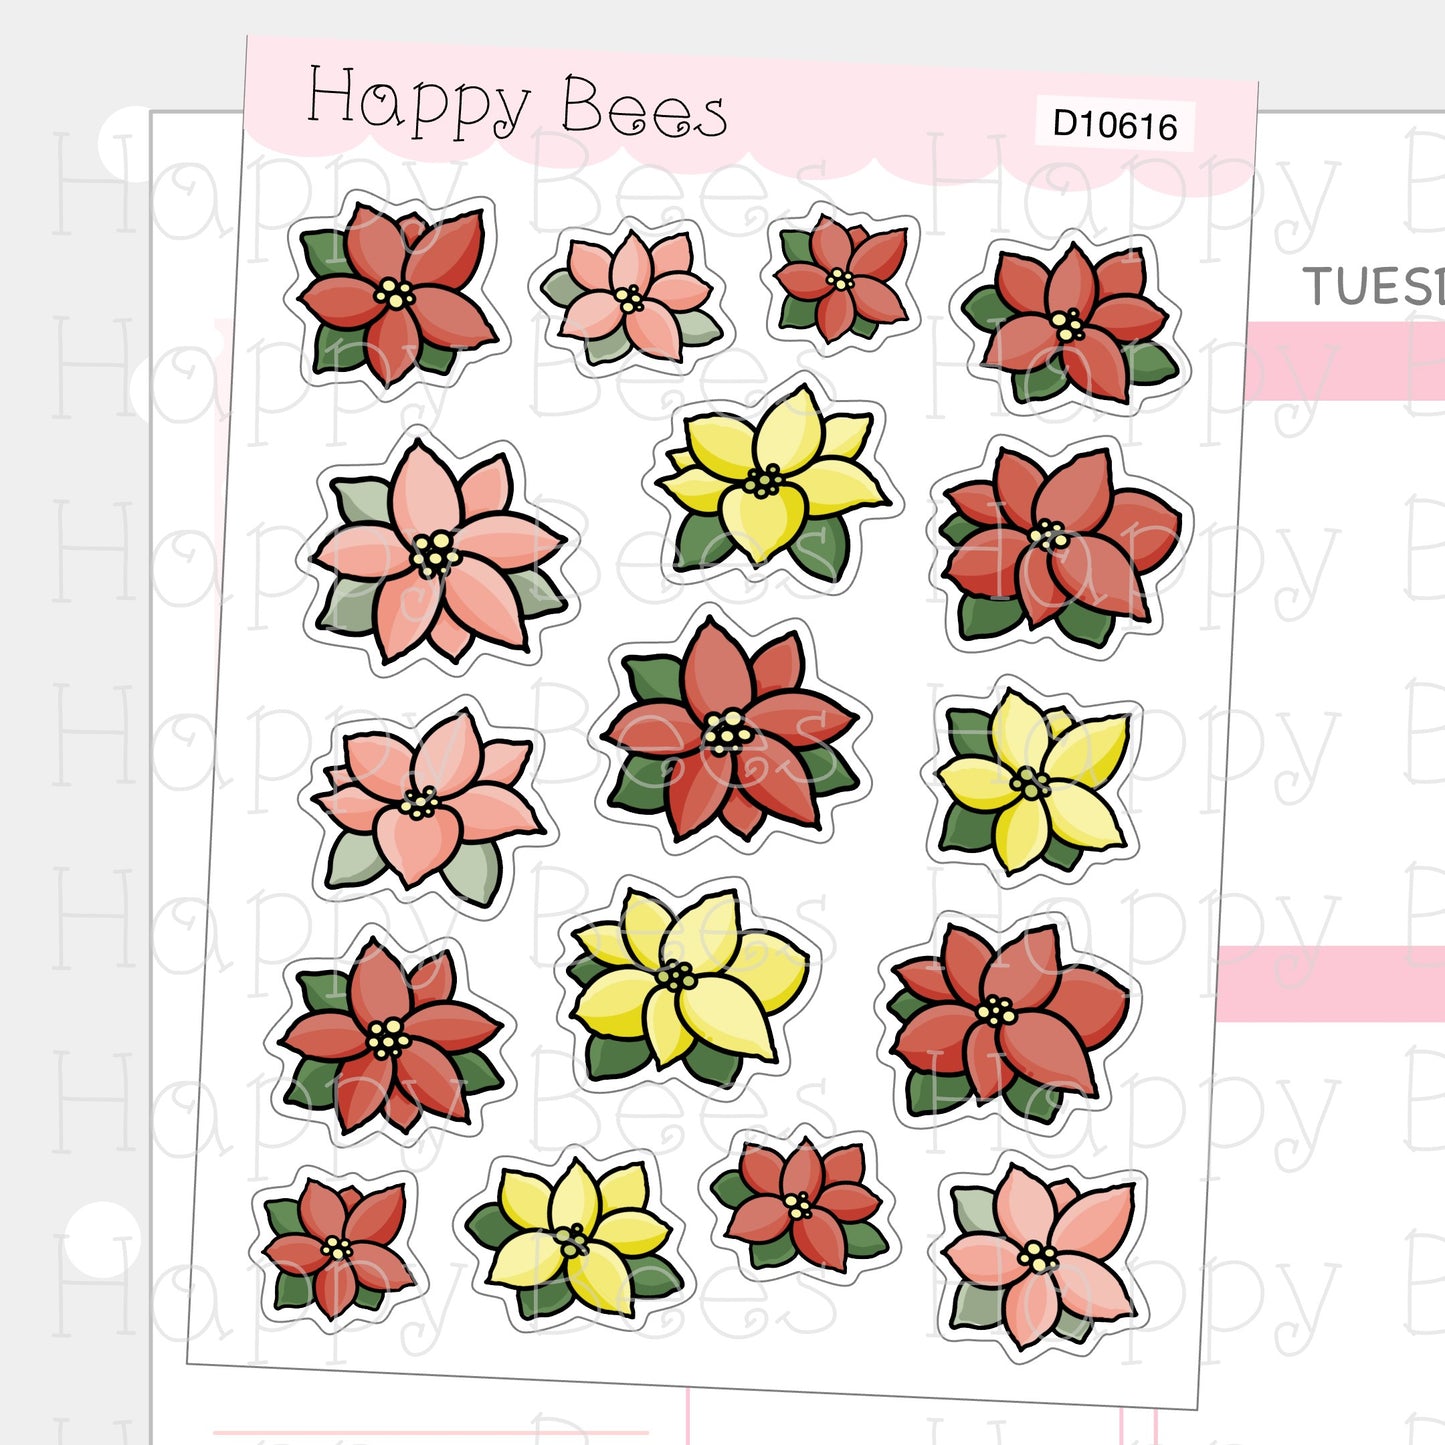 Poinsettias Doodles - Cute Christmas Floral Winter Holiday Planner Stickers D10616